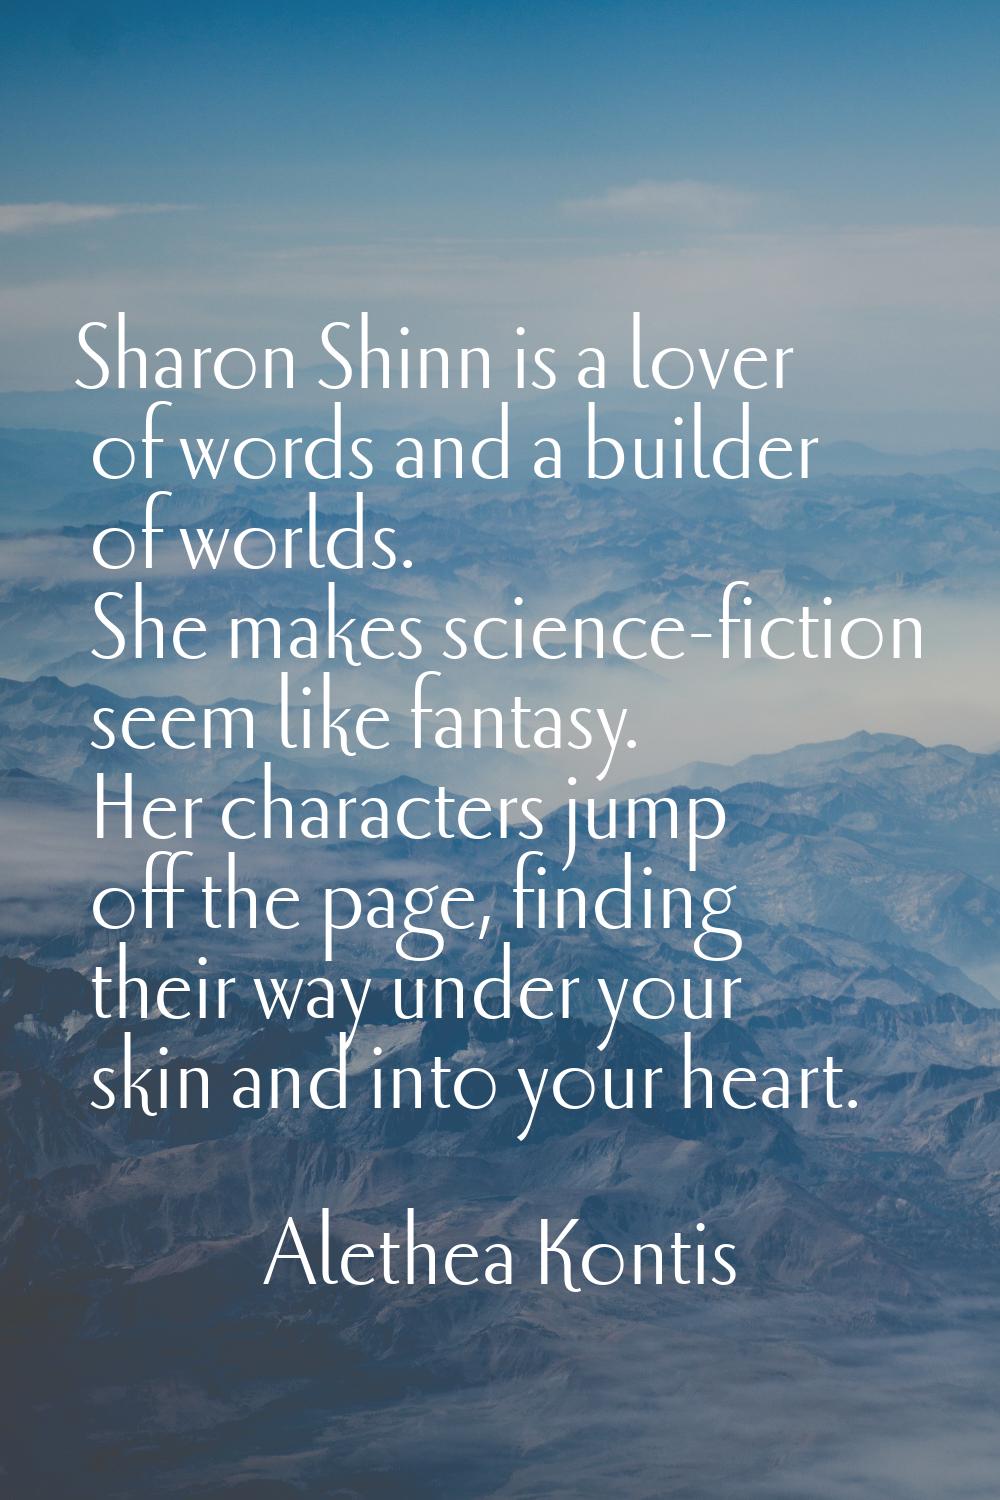 Sharon Shinn is a lover of words and a builder of worlds. She makes science-fiction seem like fanta